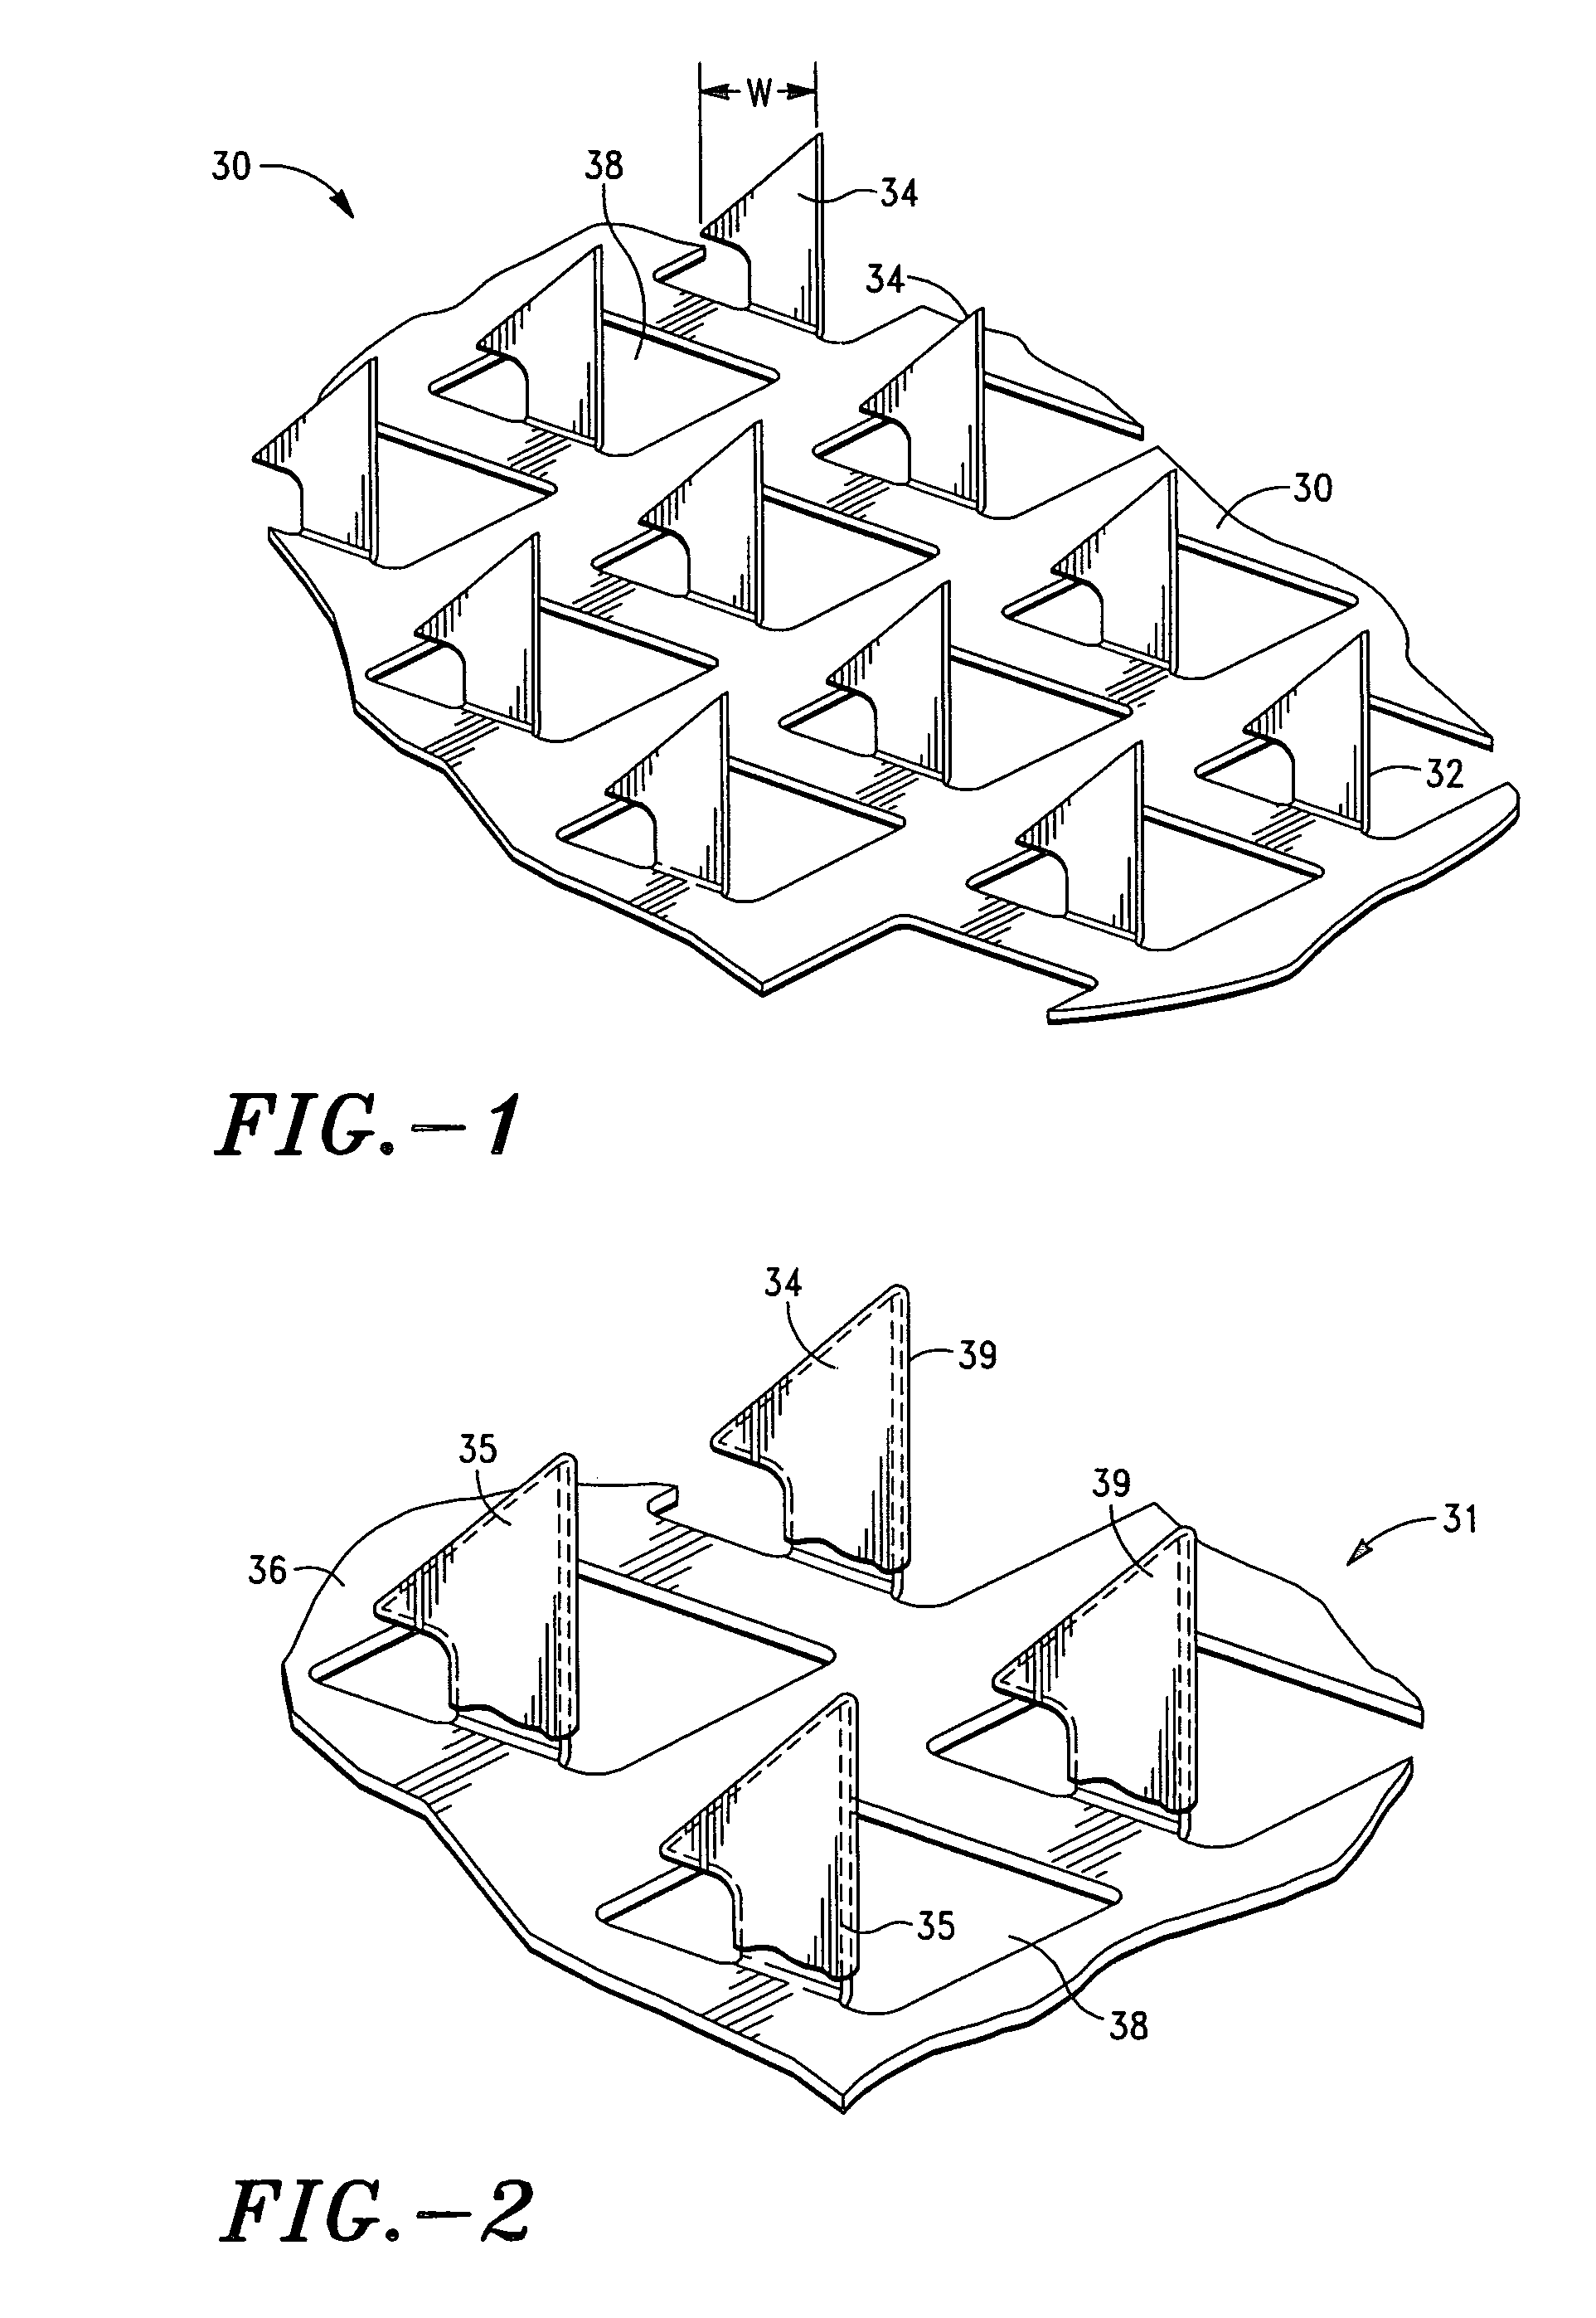 Apparatus and method for transdermal delivery of natriuretic peptides